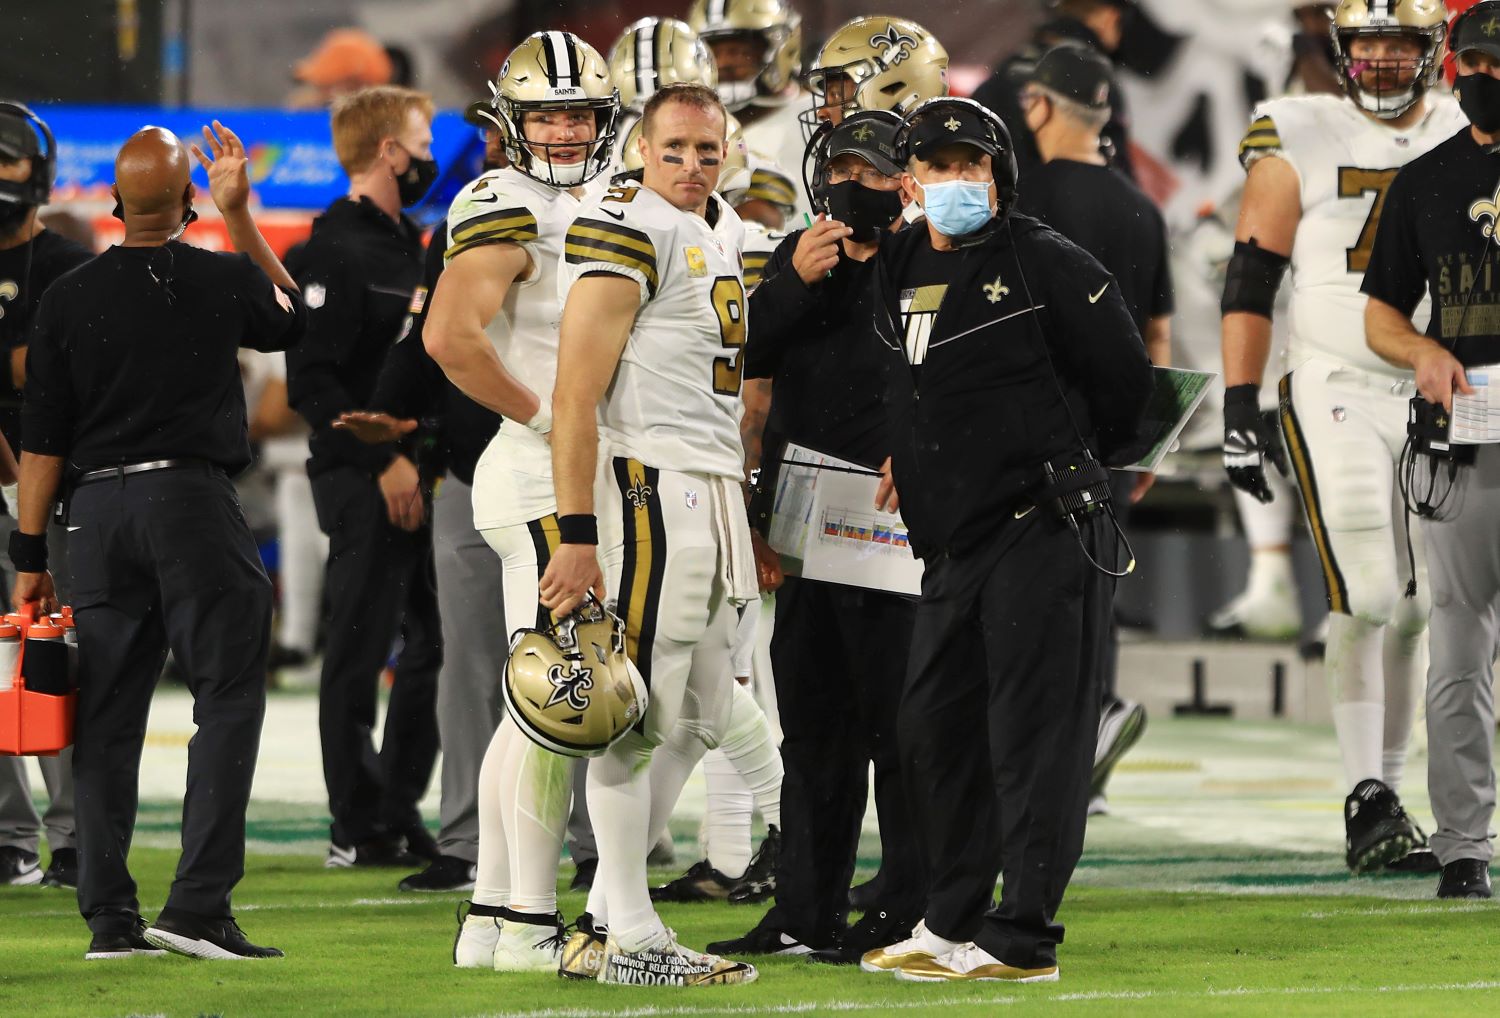 Sean Payton recently revealed how the New Orleans Saints plan to replace Drew Brees. Will their unorthodox approach to the QB spot pay off?